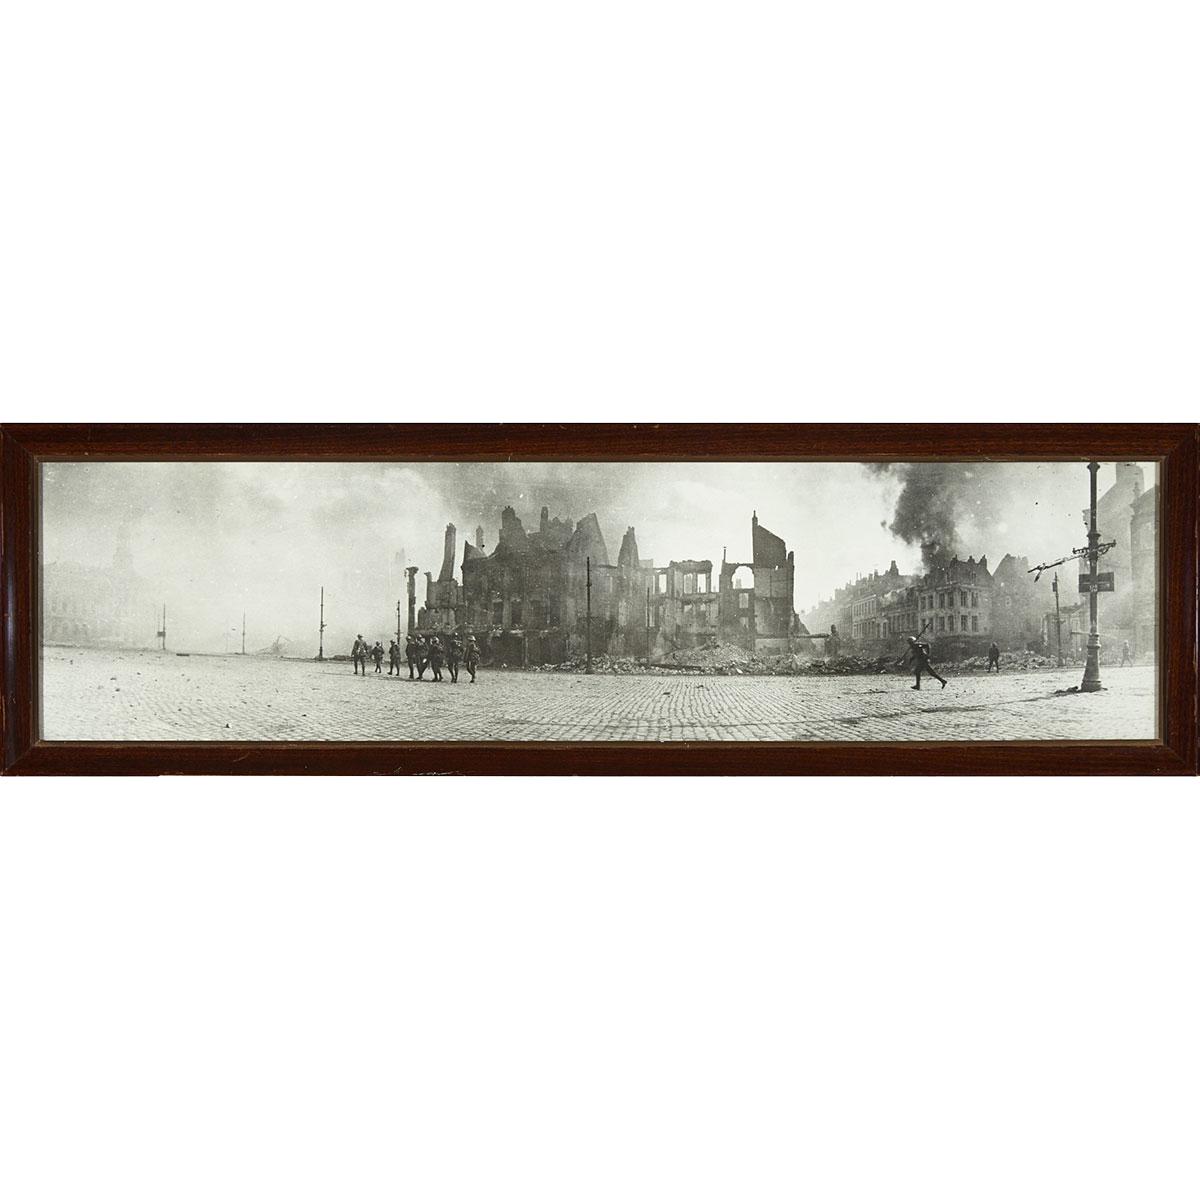 WWI Panorama Photograph of 3rd Canadian Division crossing the Square of Cambrai, France on October 9, 1918